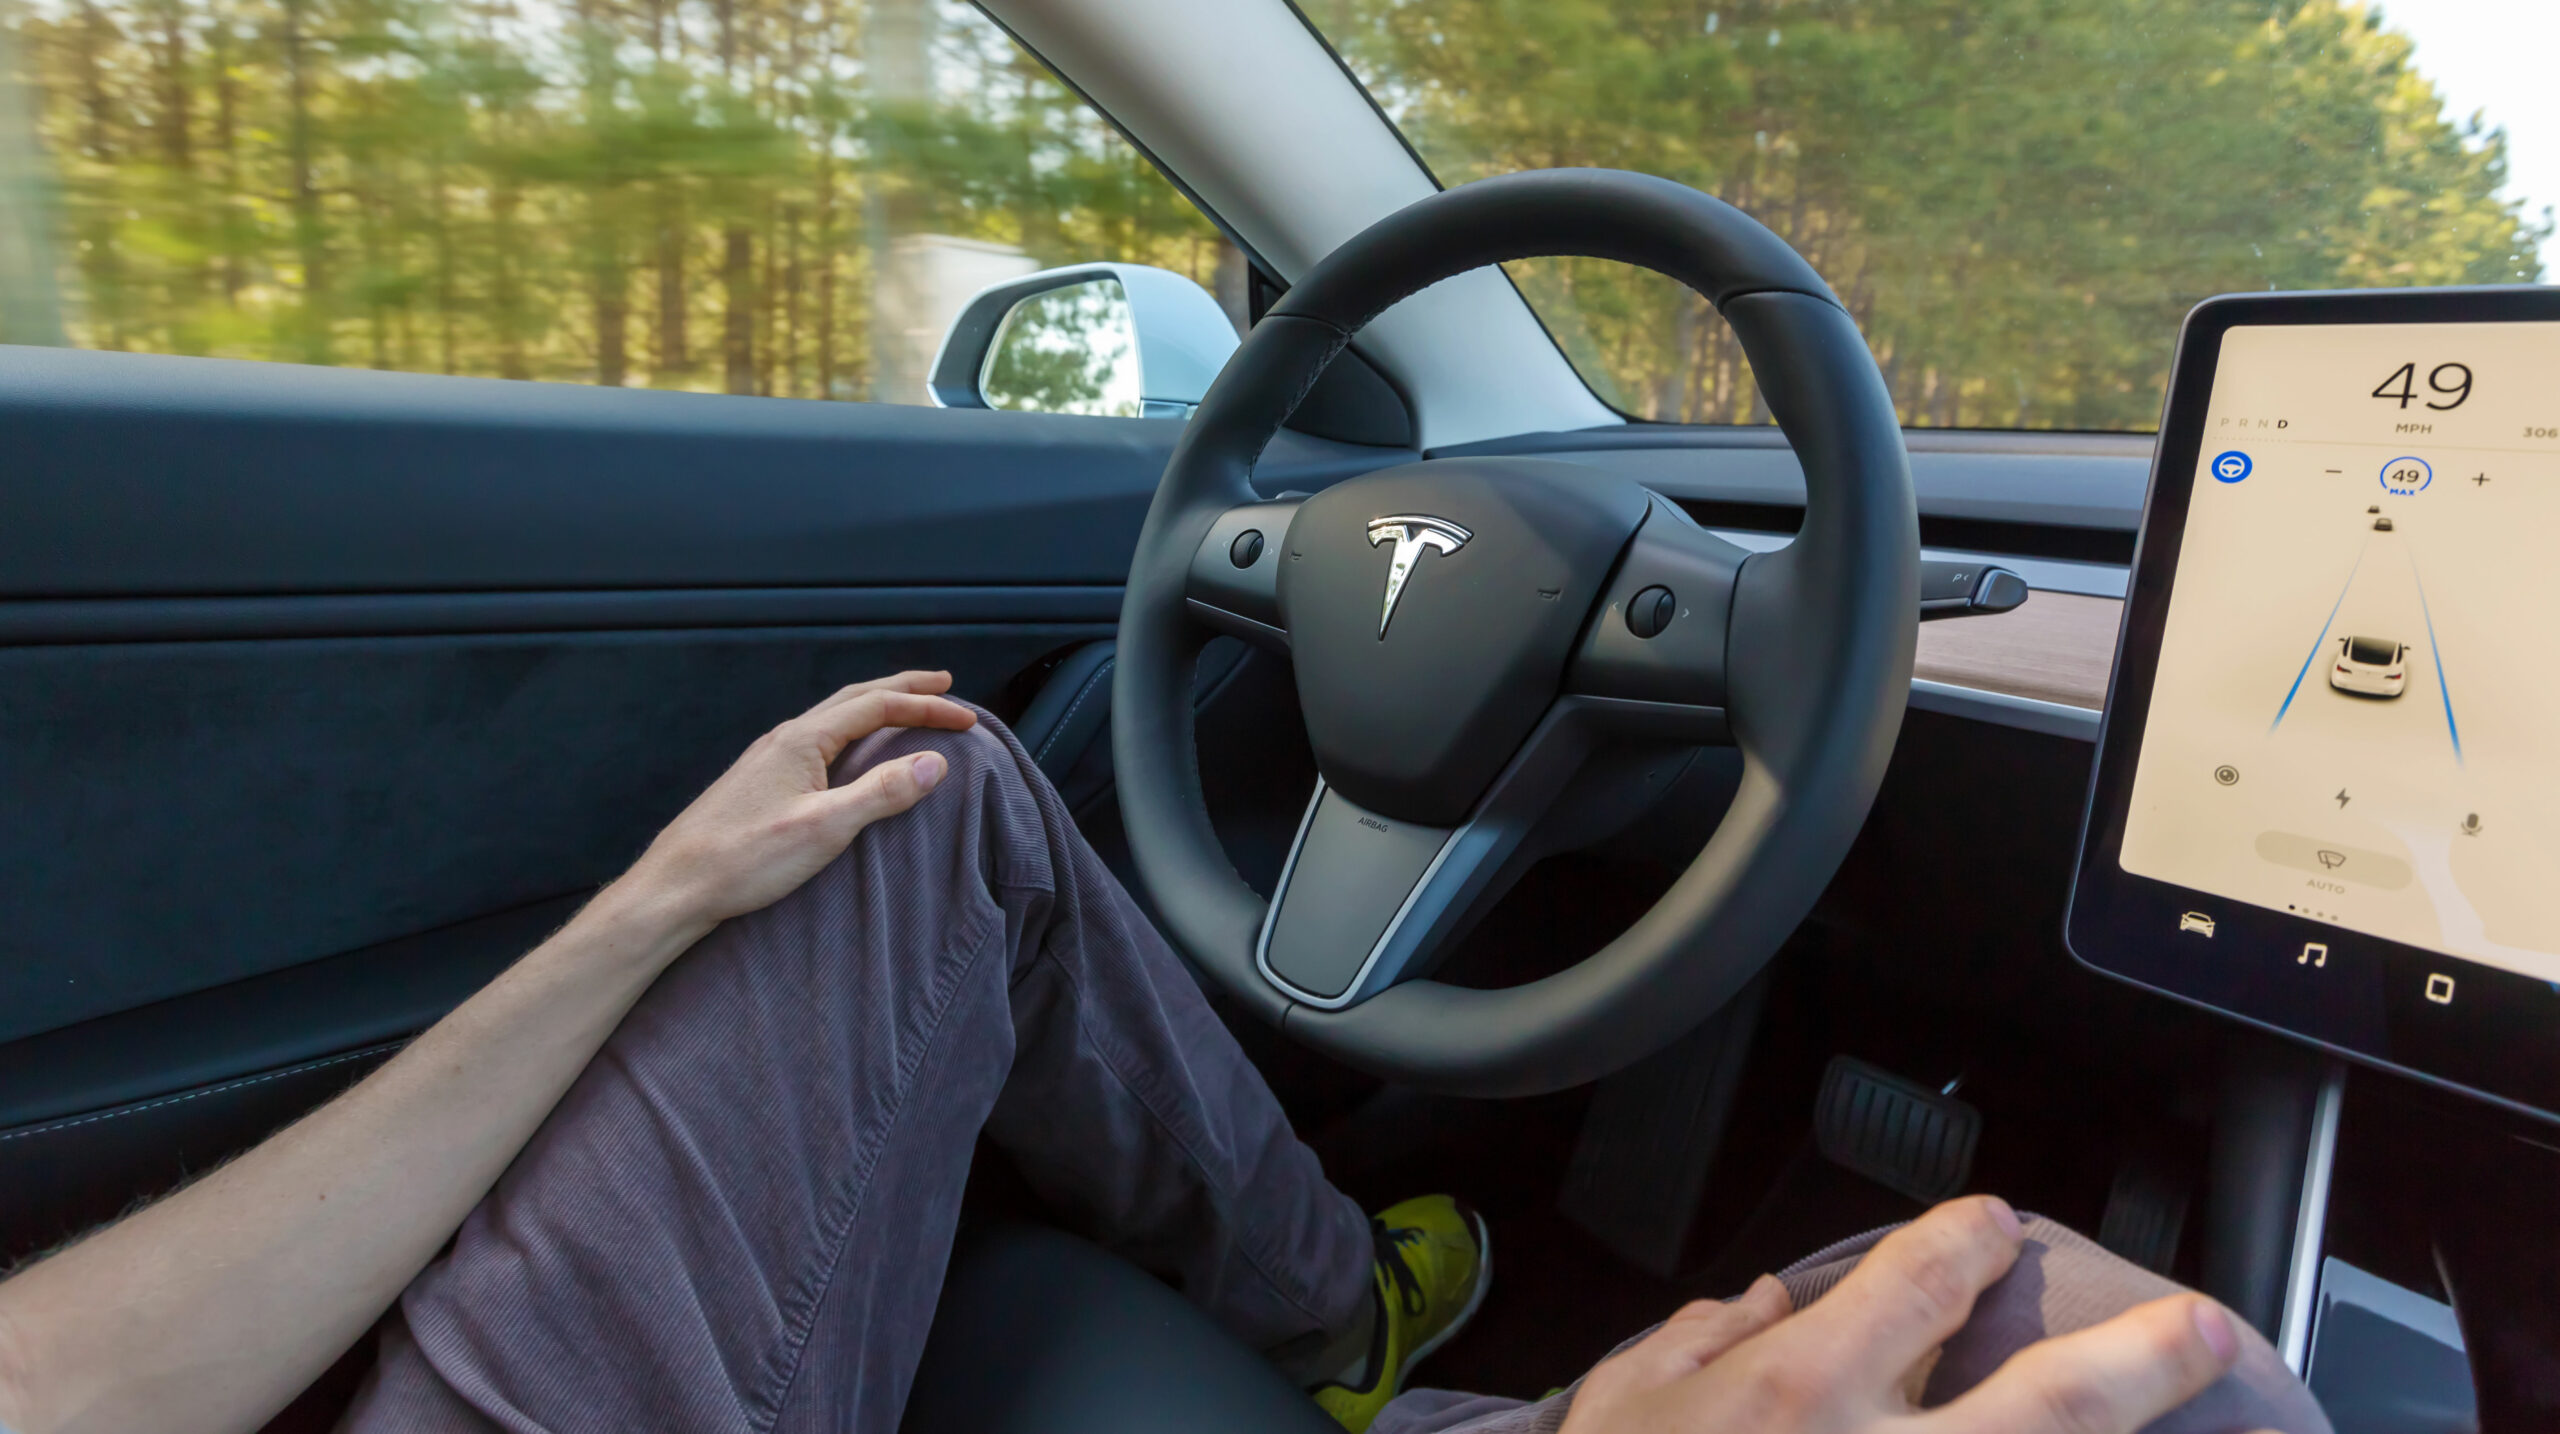 Tesla says its Autopilot prevents roughly 40 accidents per day